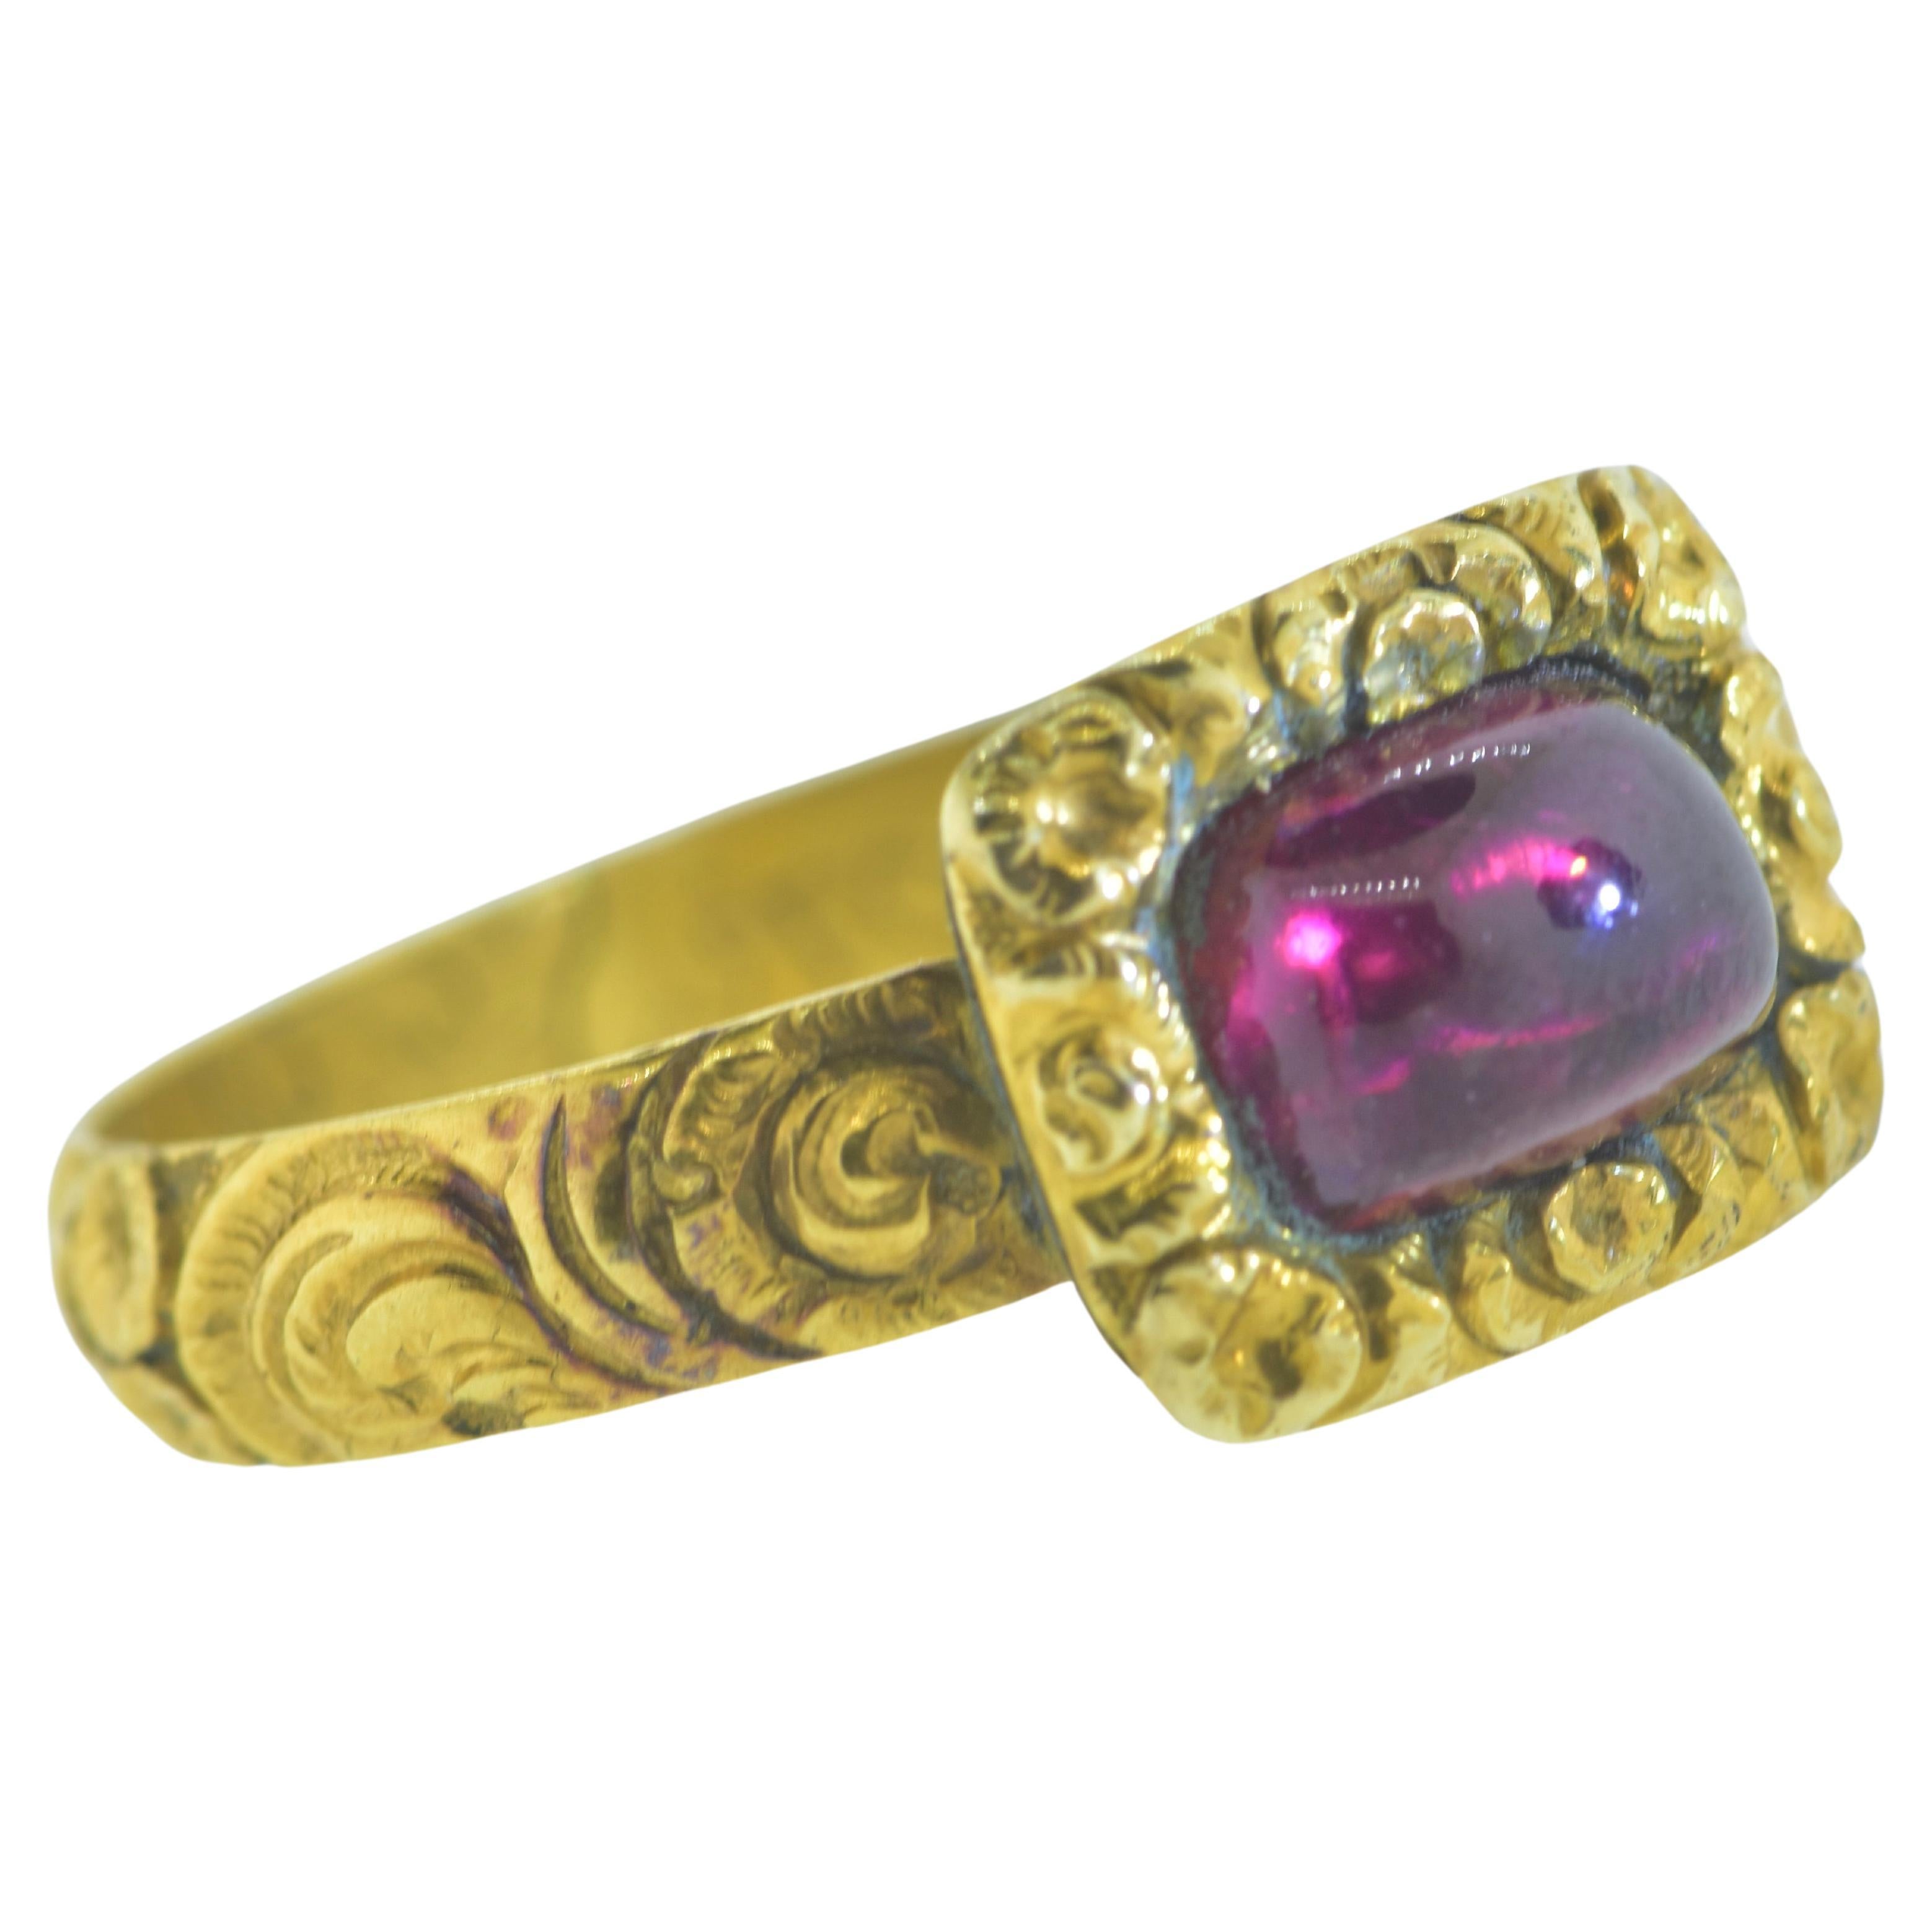 Antique 18K and Garnet Ring,  Inscribed and dated 1712-1765.